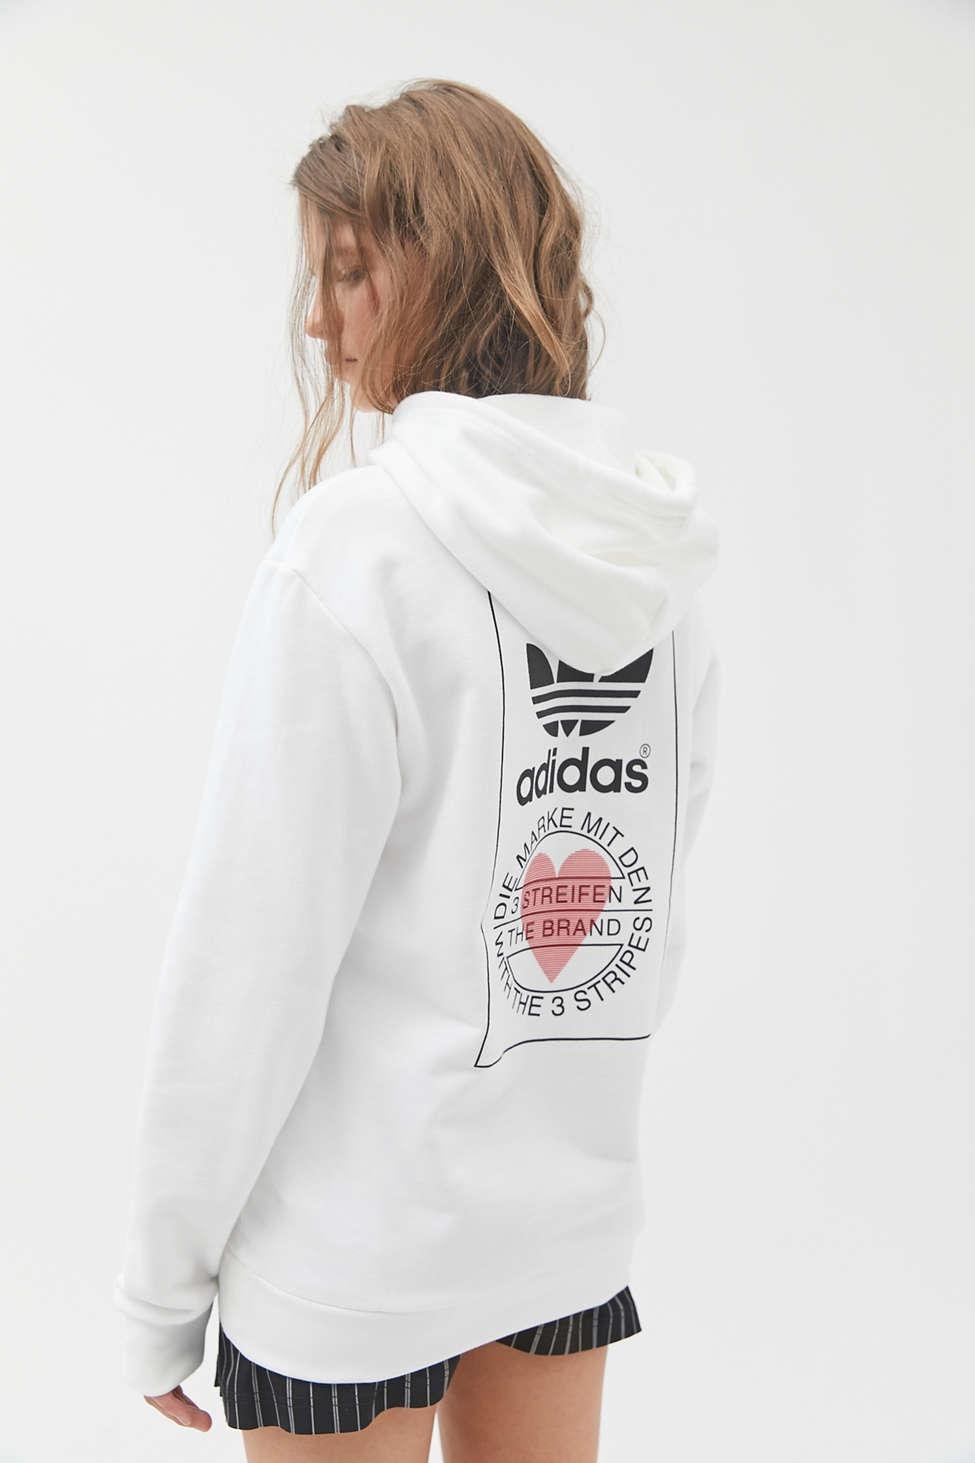 adidas the brand with 3 stripes